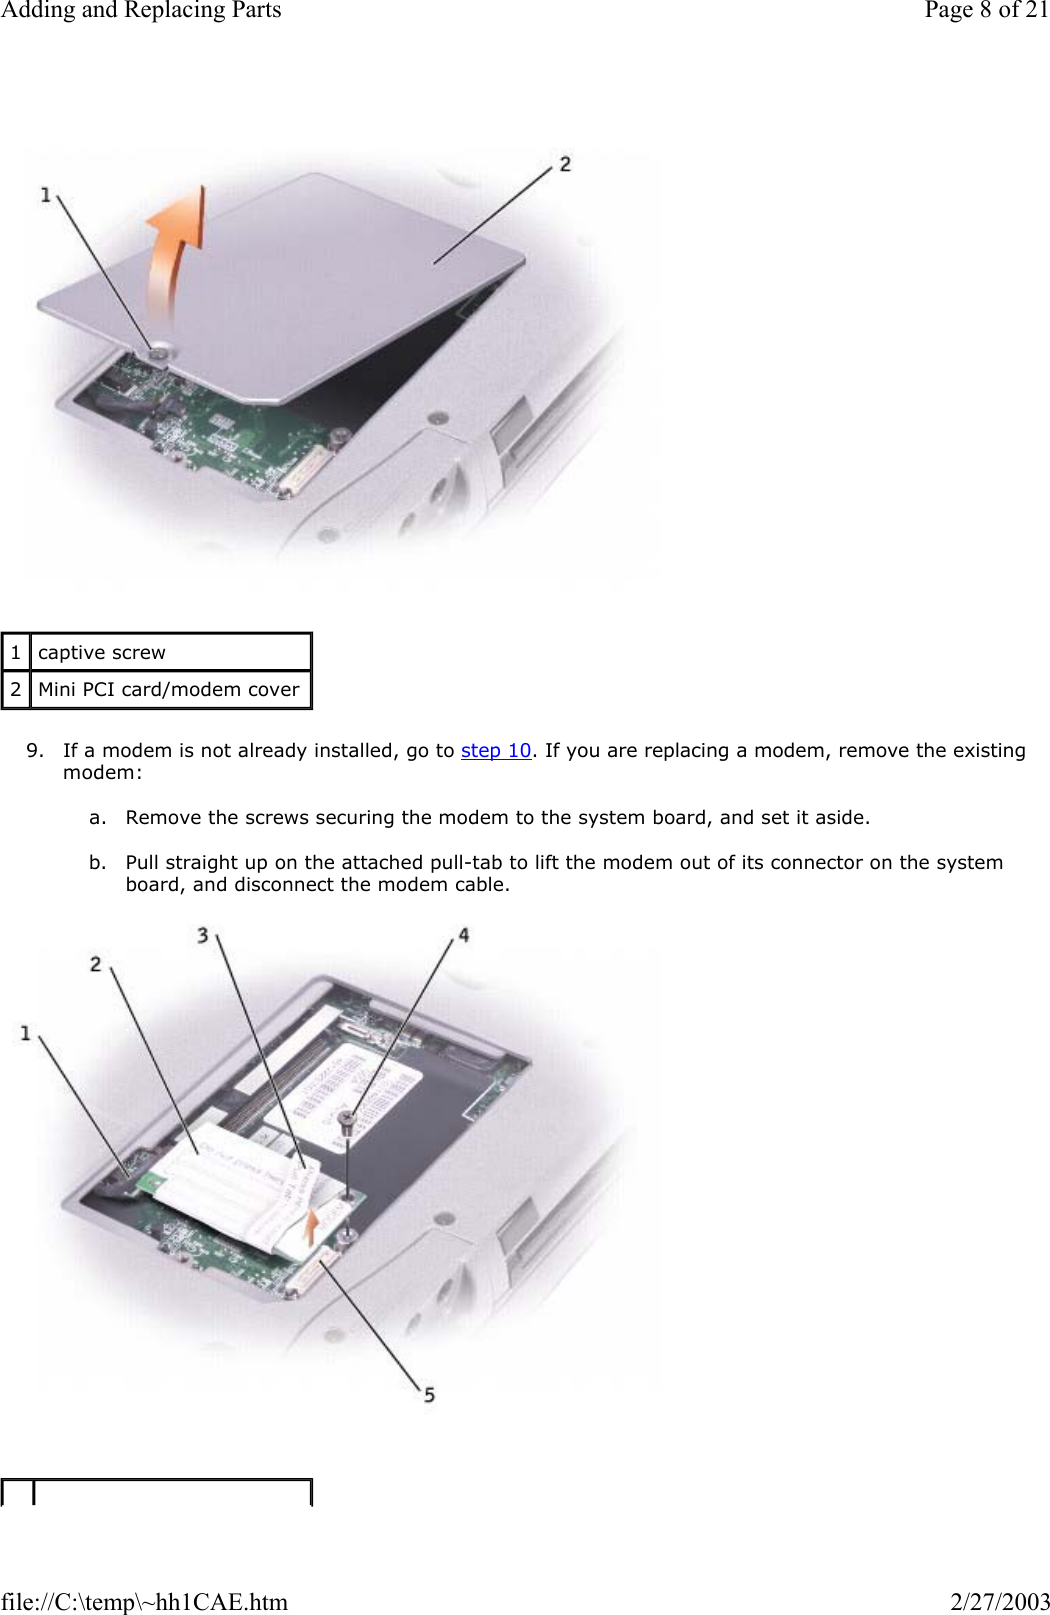    9. If a modem is not already installed, go to step 10. If you are replacing a modem, remove the existing modem:  a. Remove the screws securing the modem to the system board, and set it aside.   b. Pull straight up on the attached pull-tab to lift the modem out of its connector on the system board, and disconnect the modem cable.    1  captive screw 2  Mini PCI card/modem cover Page 8 of 21Adding and Replacing Parts2/27/2003file://C:\temp\~hh1CAE.htm